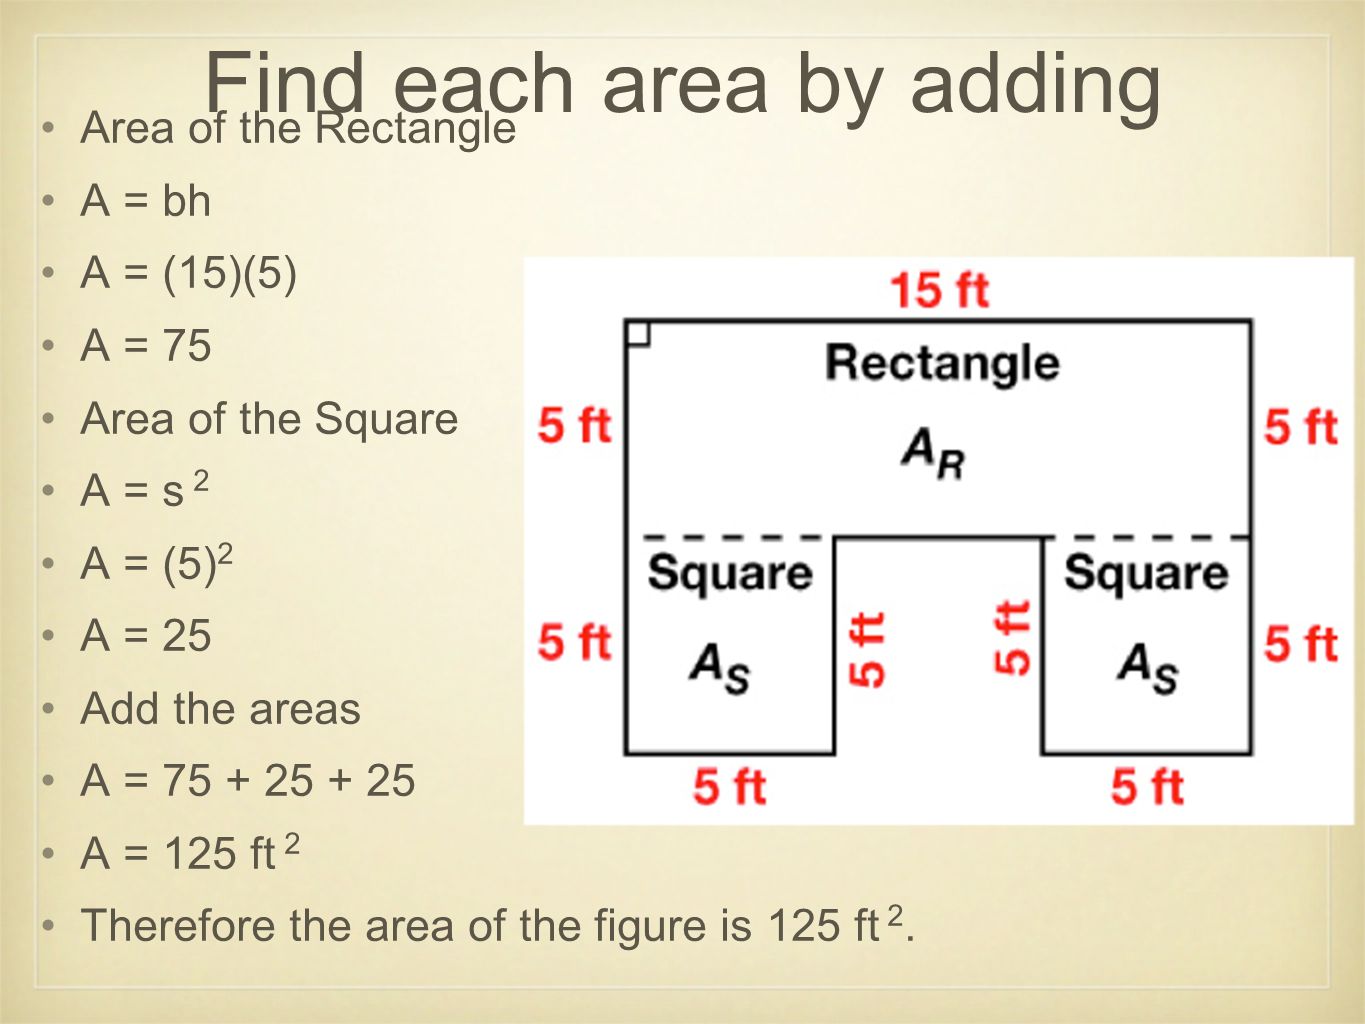 Find each area by adding